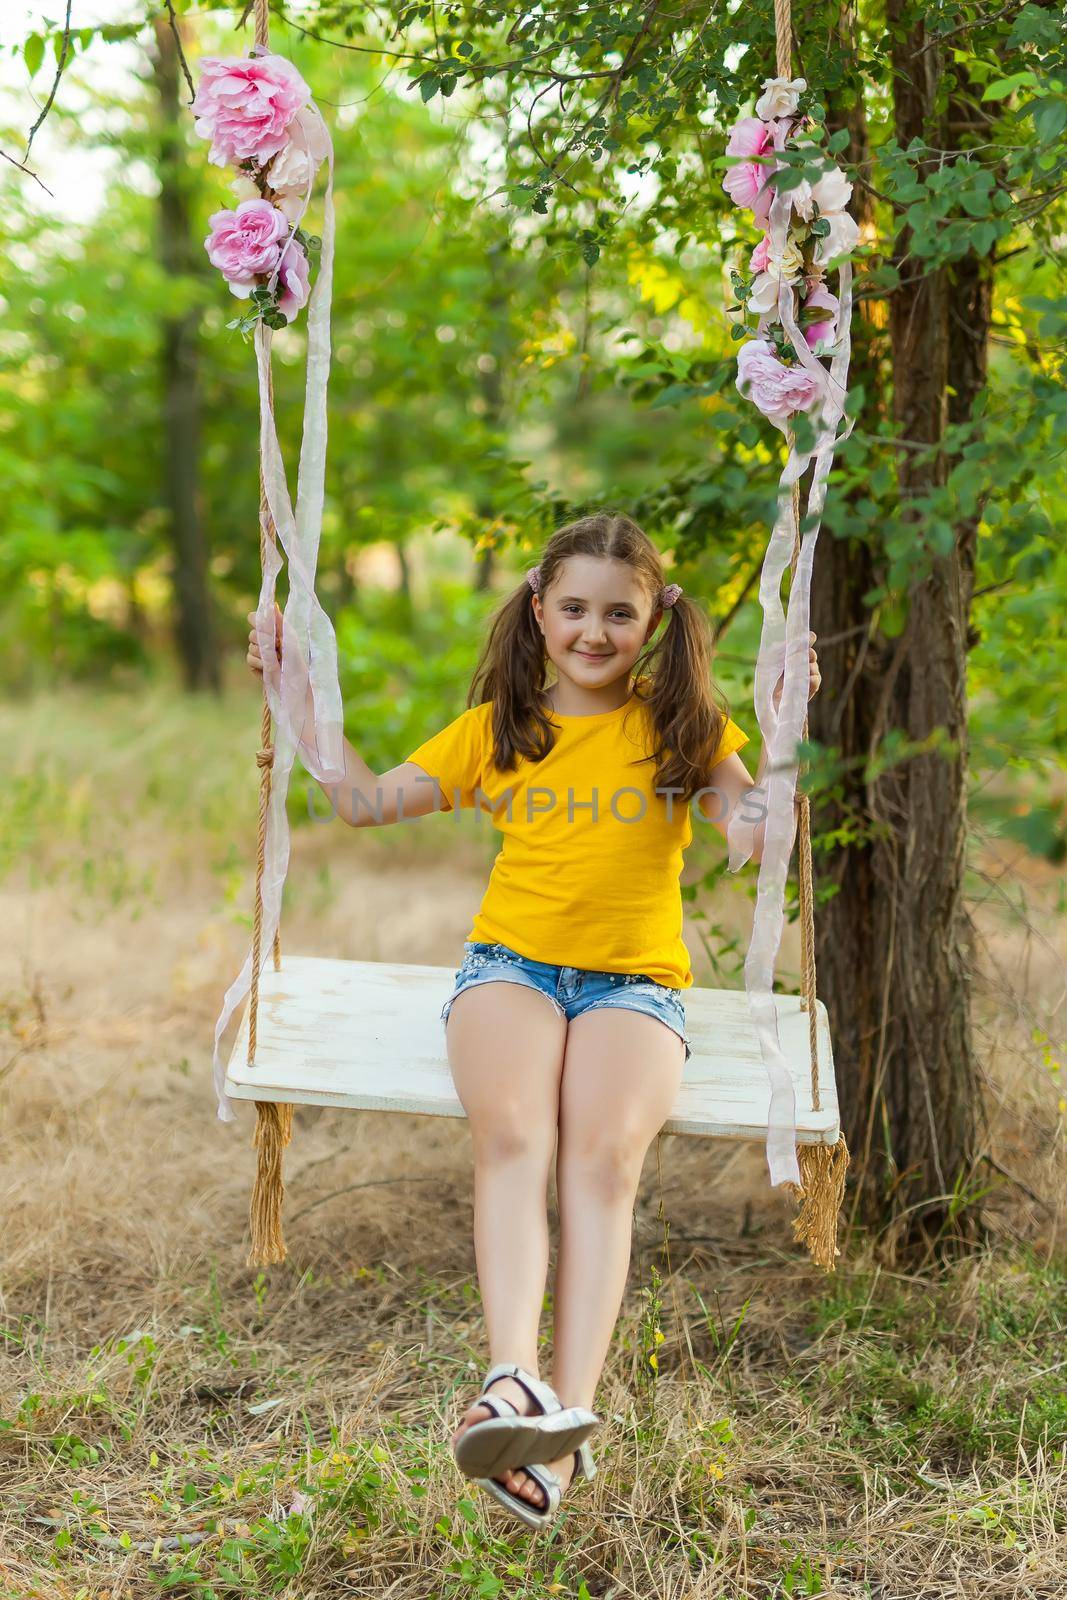 Cute smiling girl in a yellow t-shirt having fun on a swing in tree forest. Sunny day. Summer outdoor activities for kids